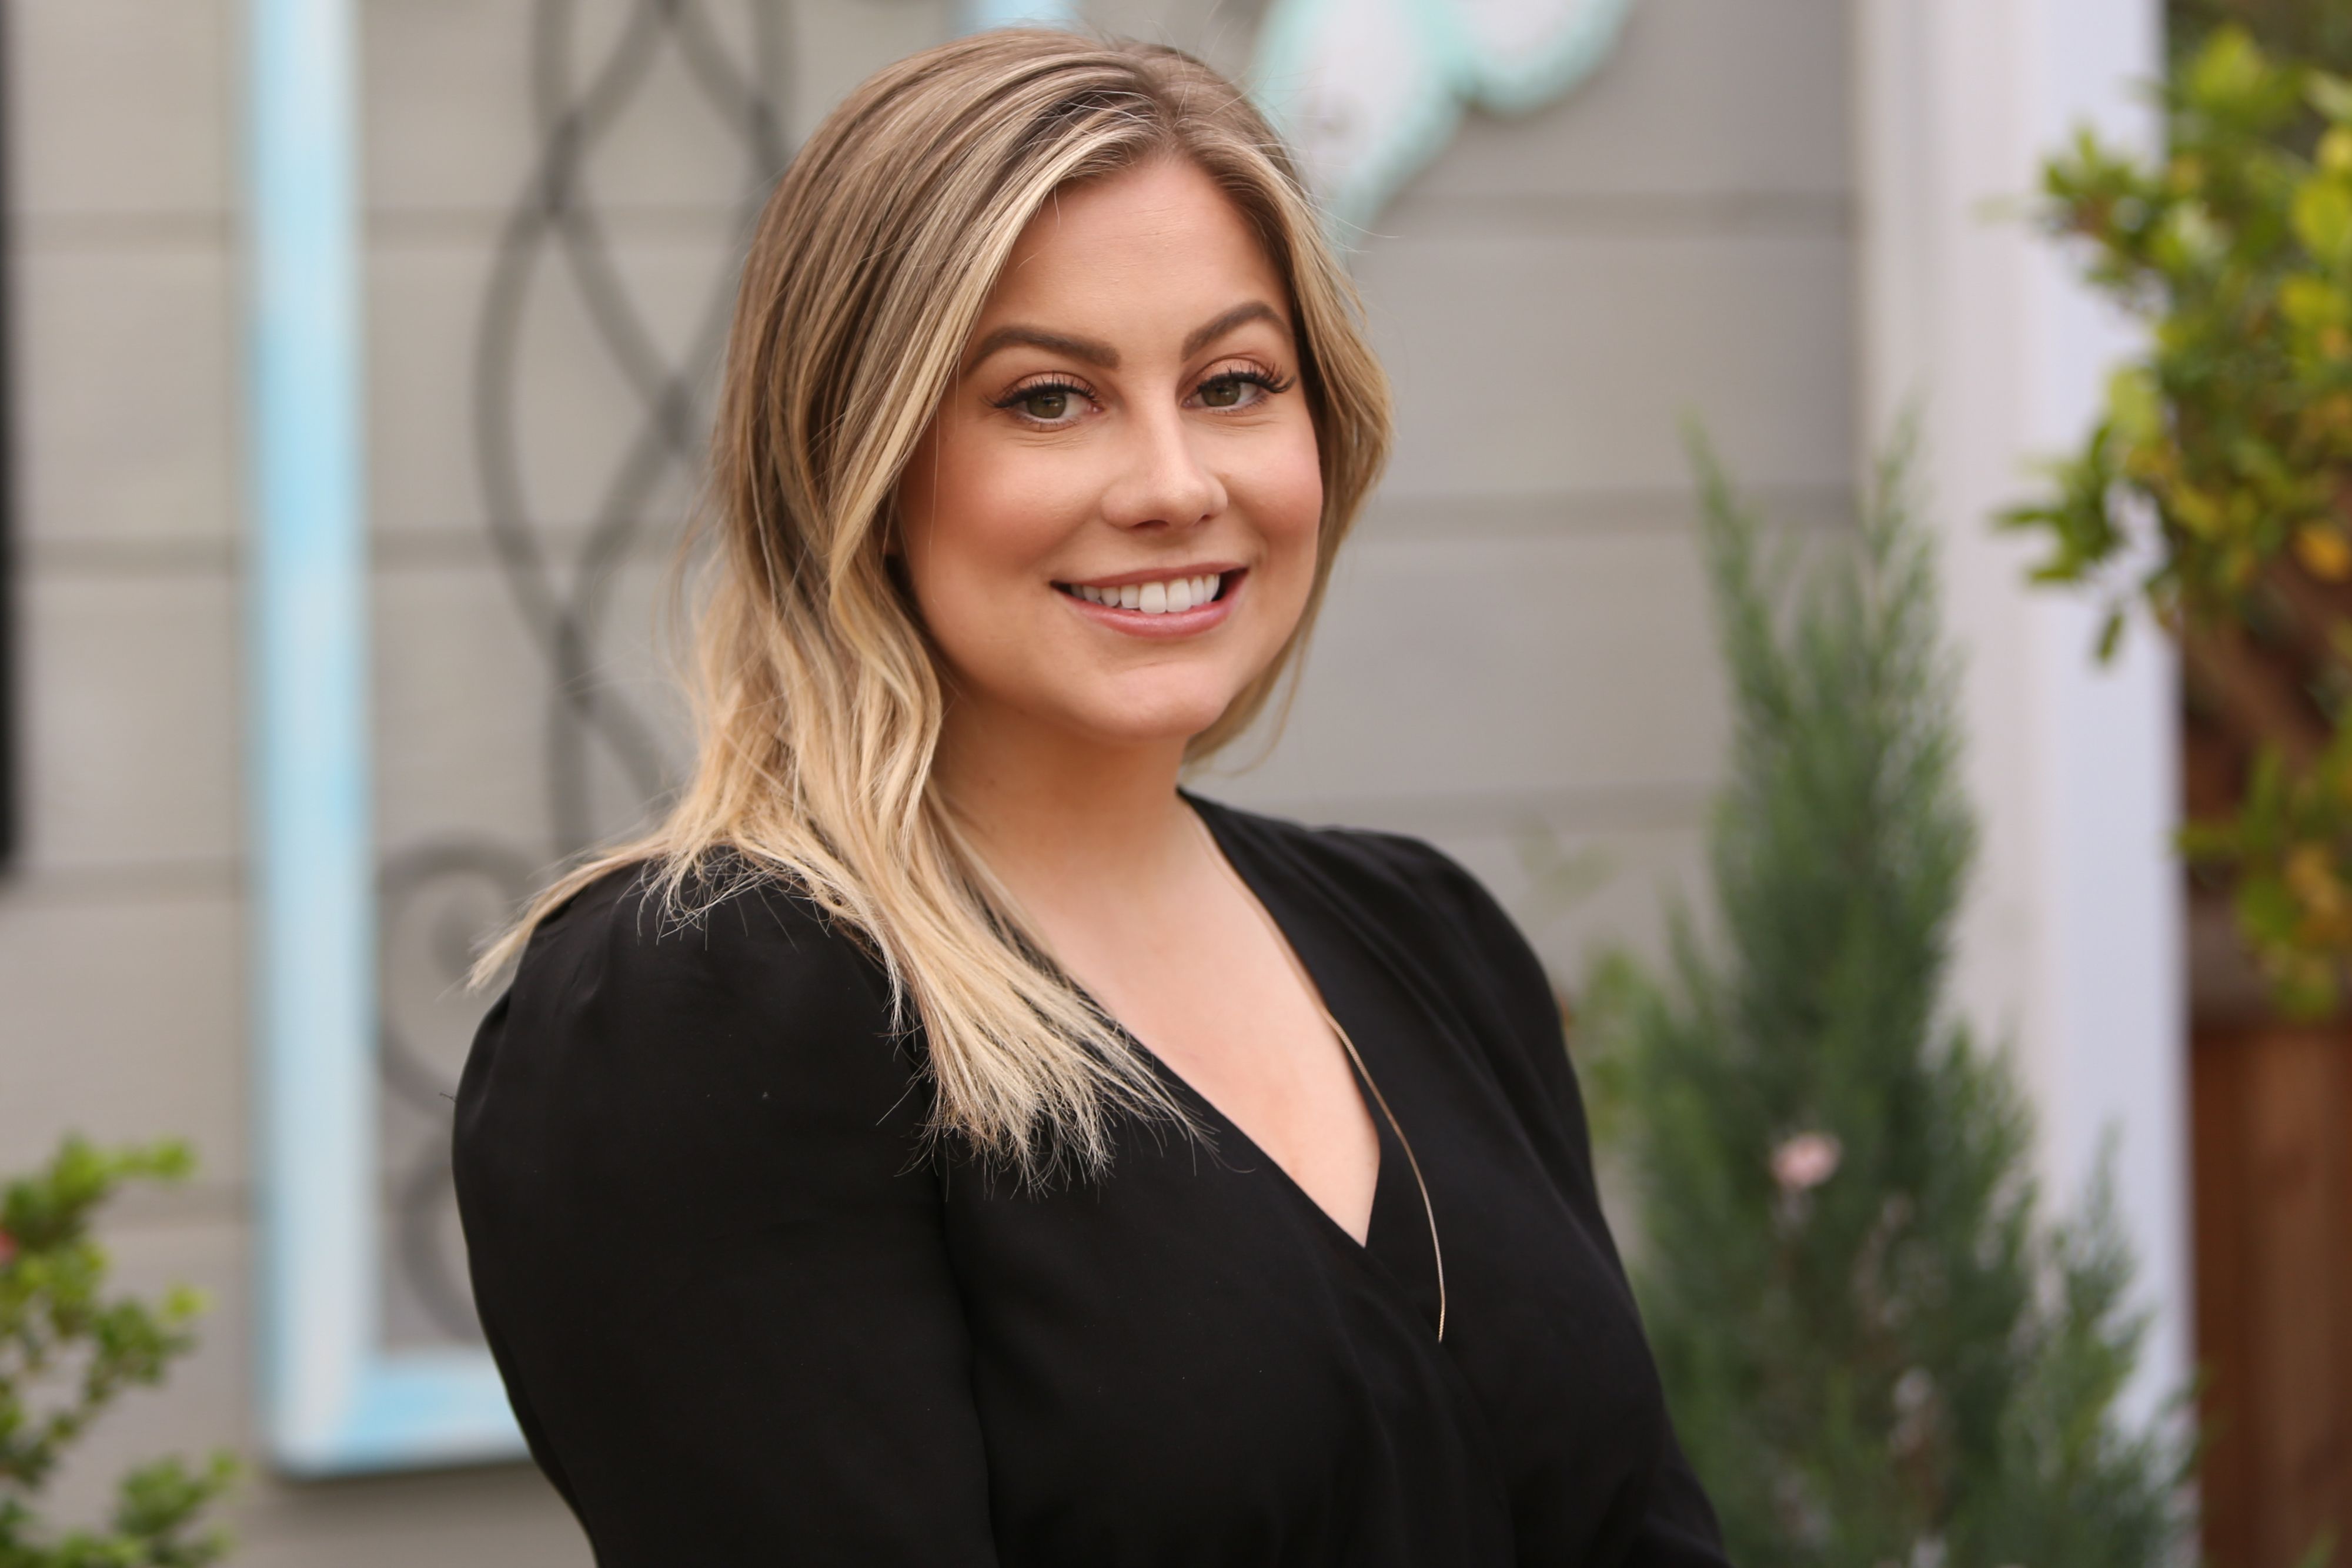 Shawn Johnson visited Hallmark's "Home & Family" at Universal Studios Hollywood on April 24, 2019 in Universal City, California | Photo: Getty Images